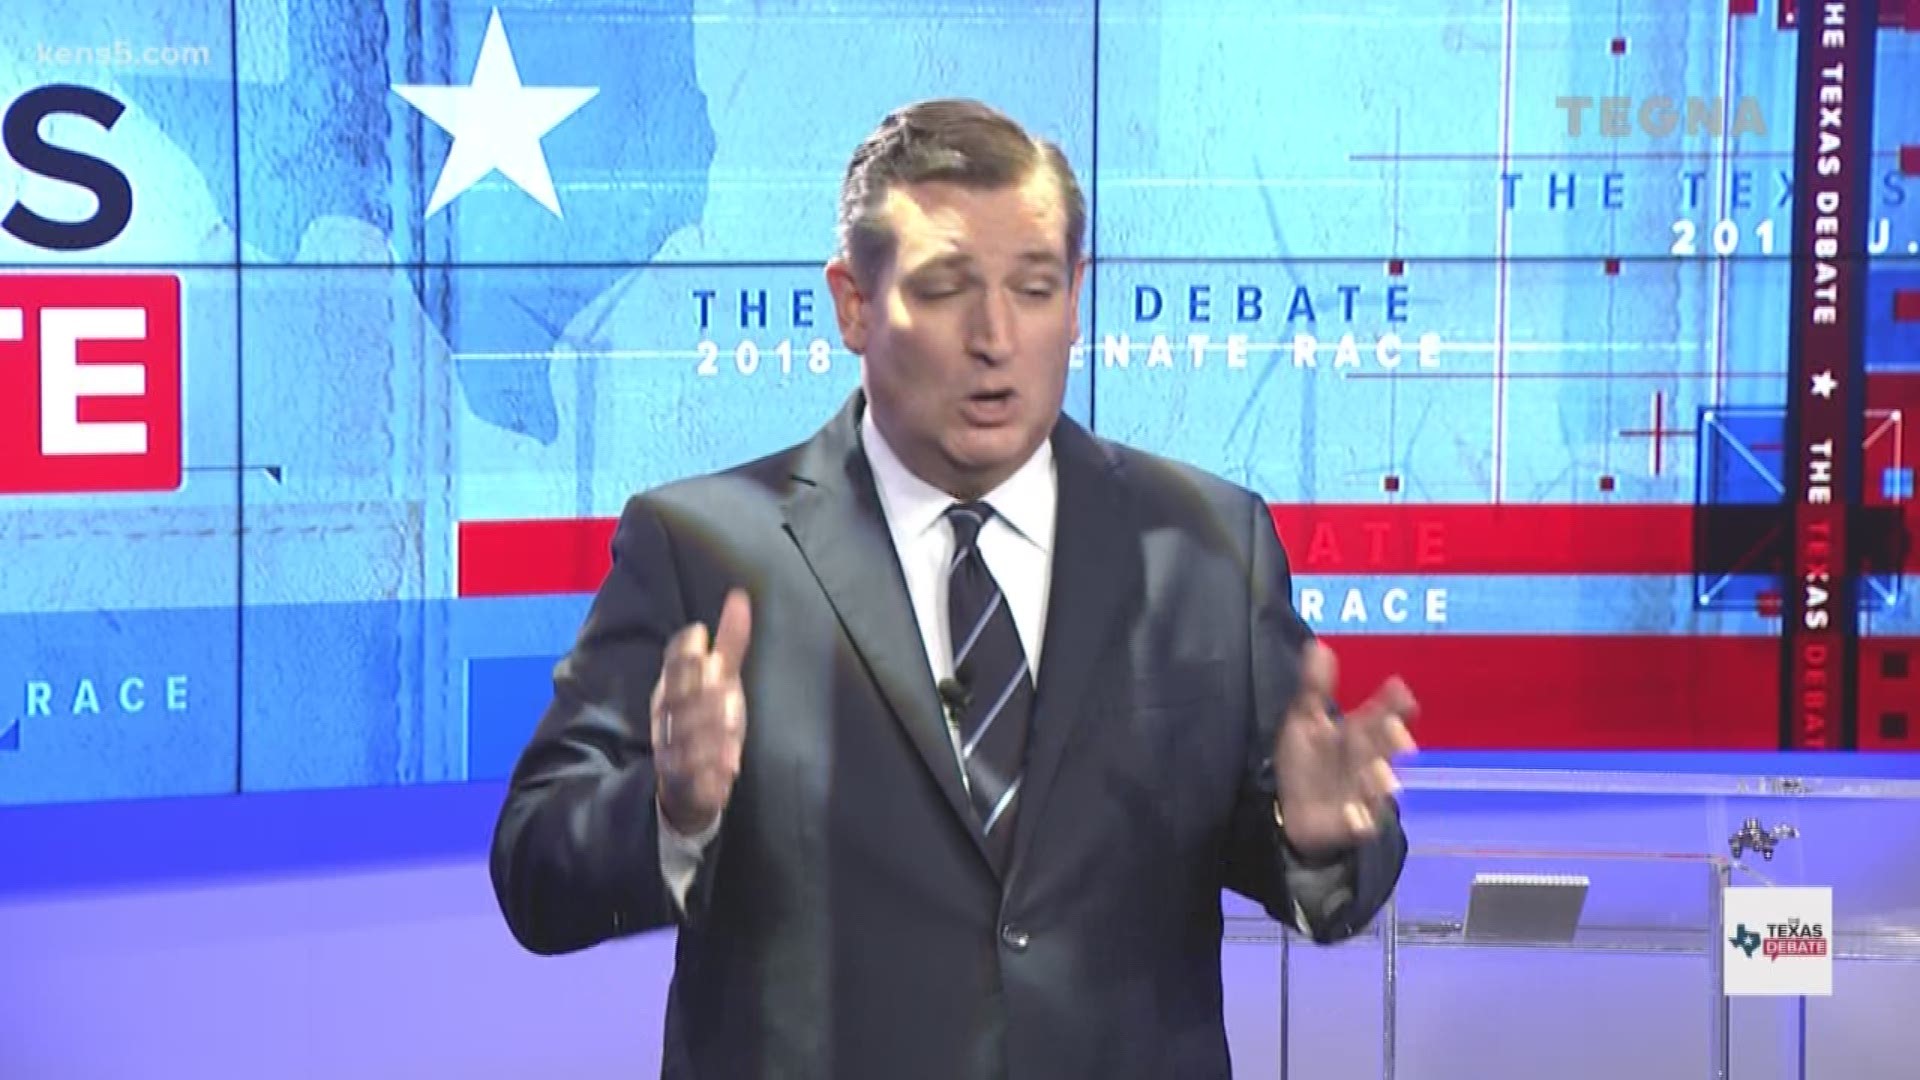 Sen. Ted Cruz says that he's the better choice in the U.S. Senate race against Candidate Beto O'Rourke and that he's the choice for hope.